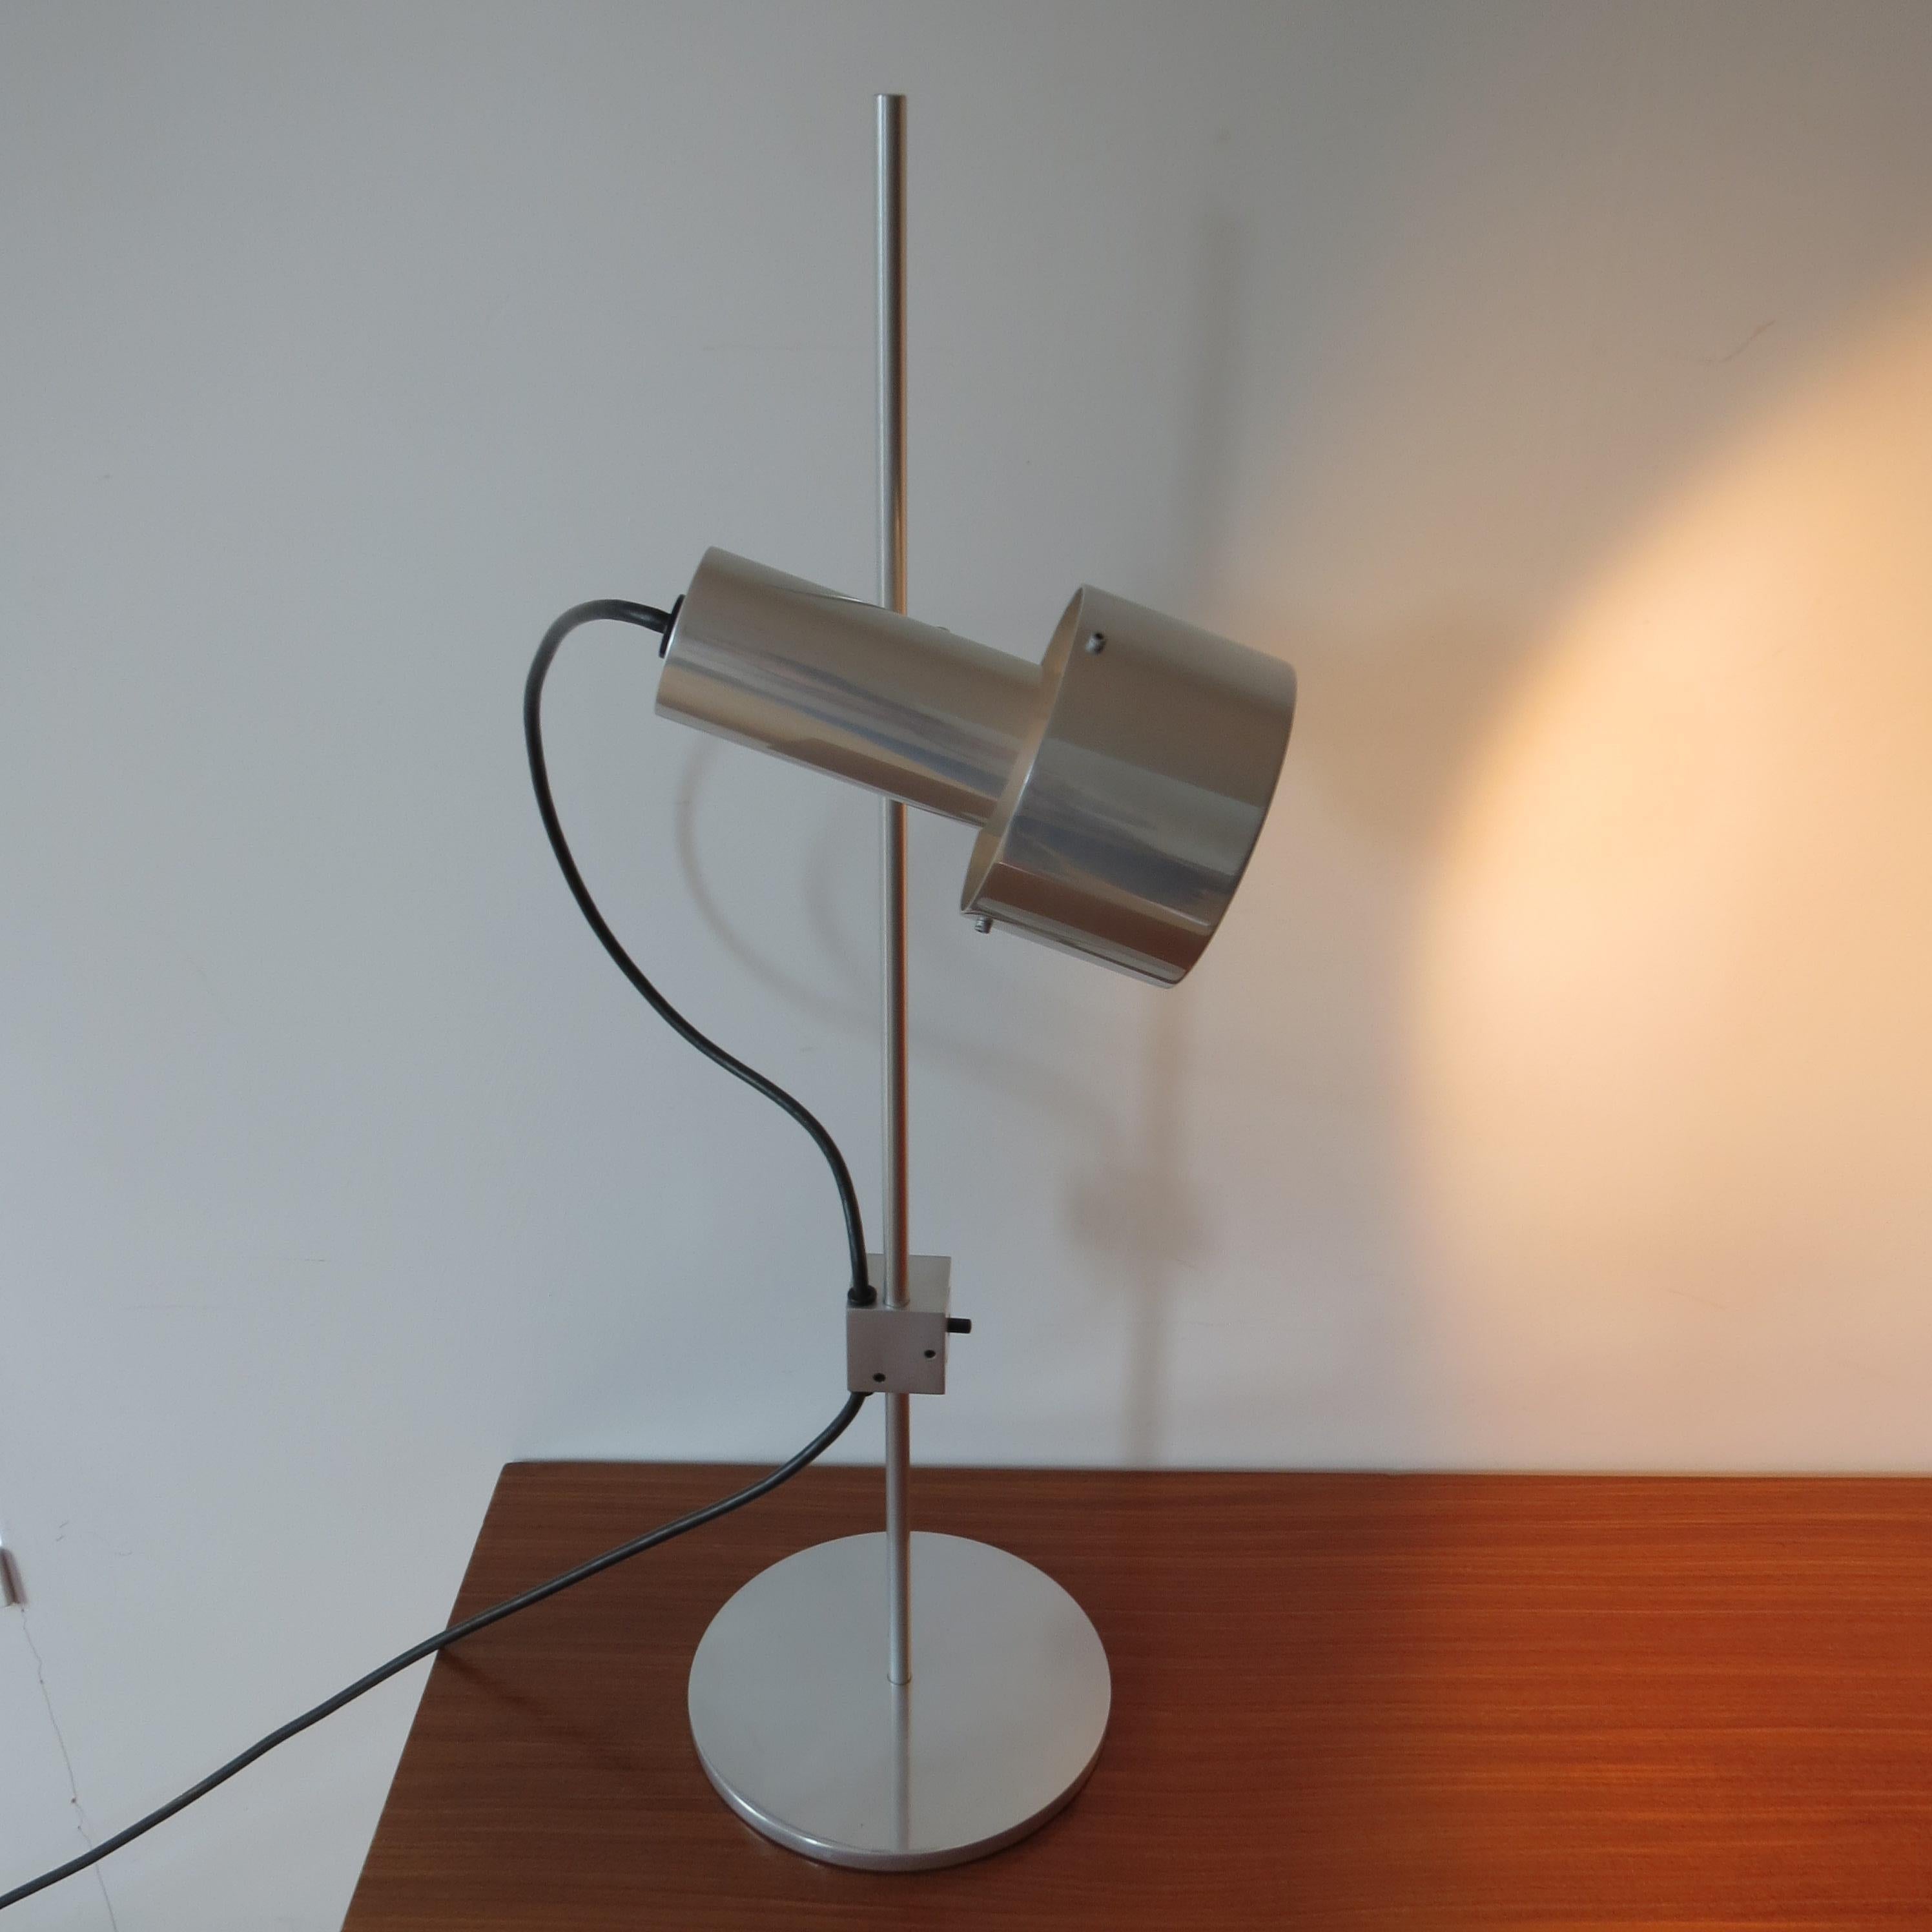 Machine-Made Peter Nelson Aluminium Single Spot Desk Lamp Early 1960s 3 available